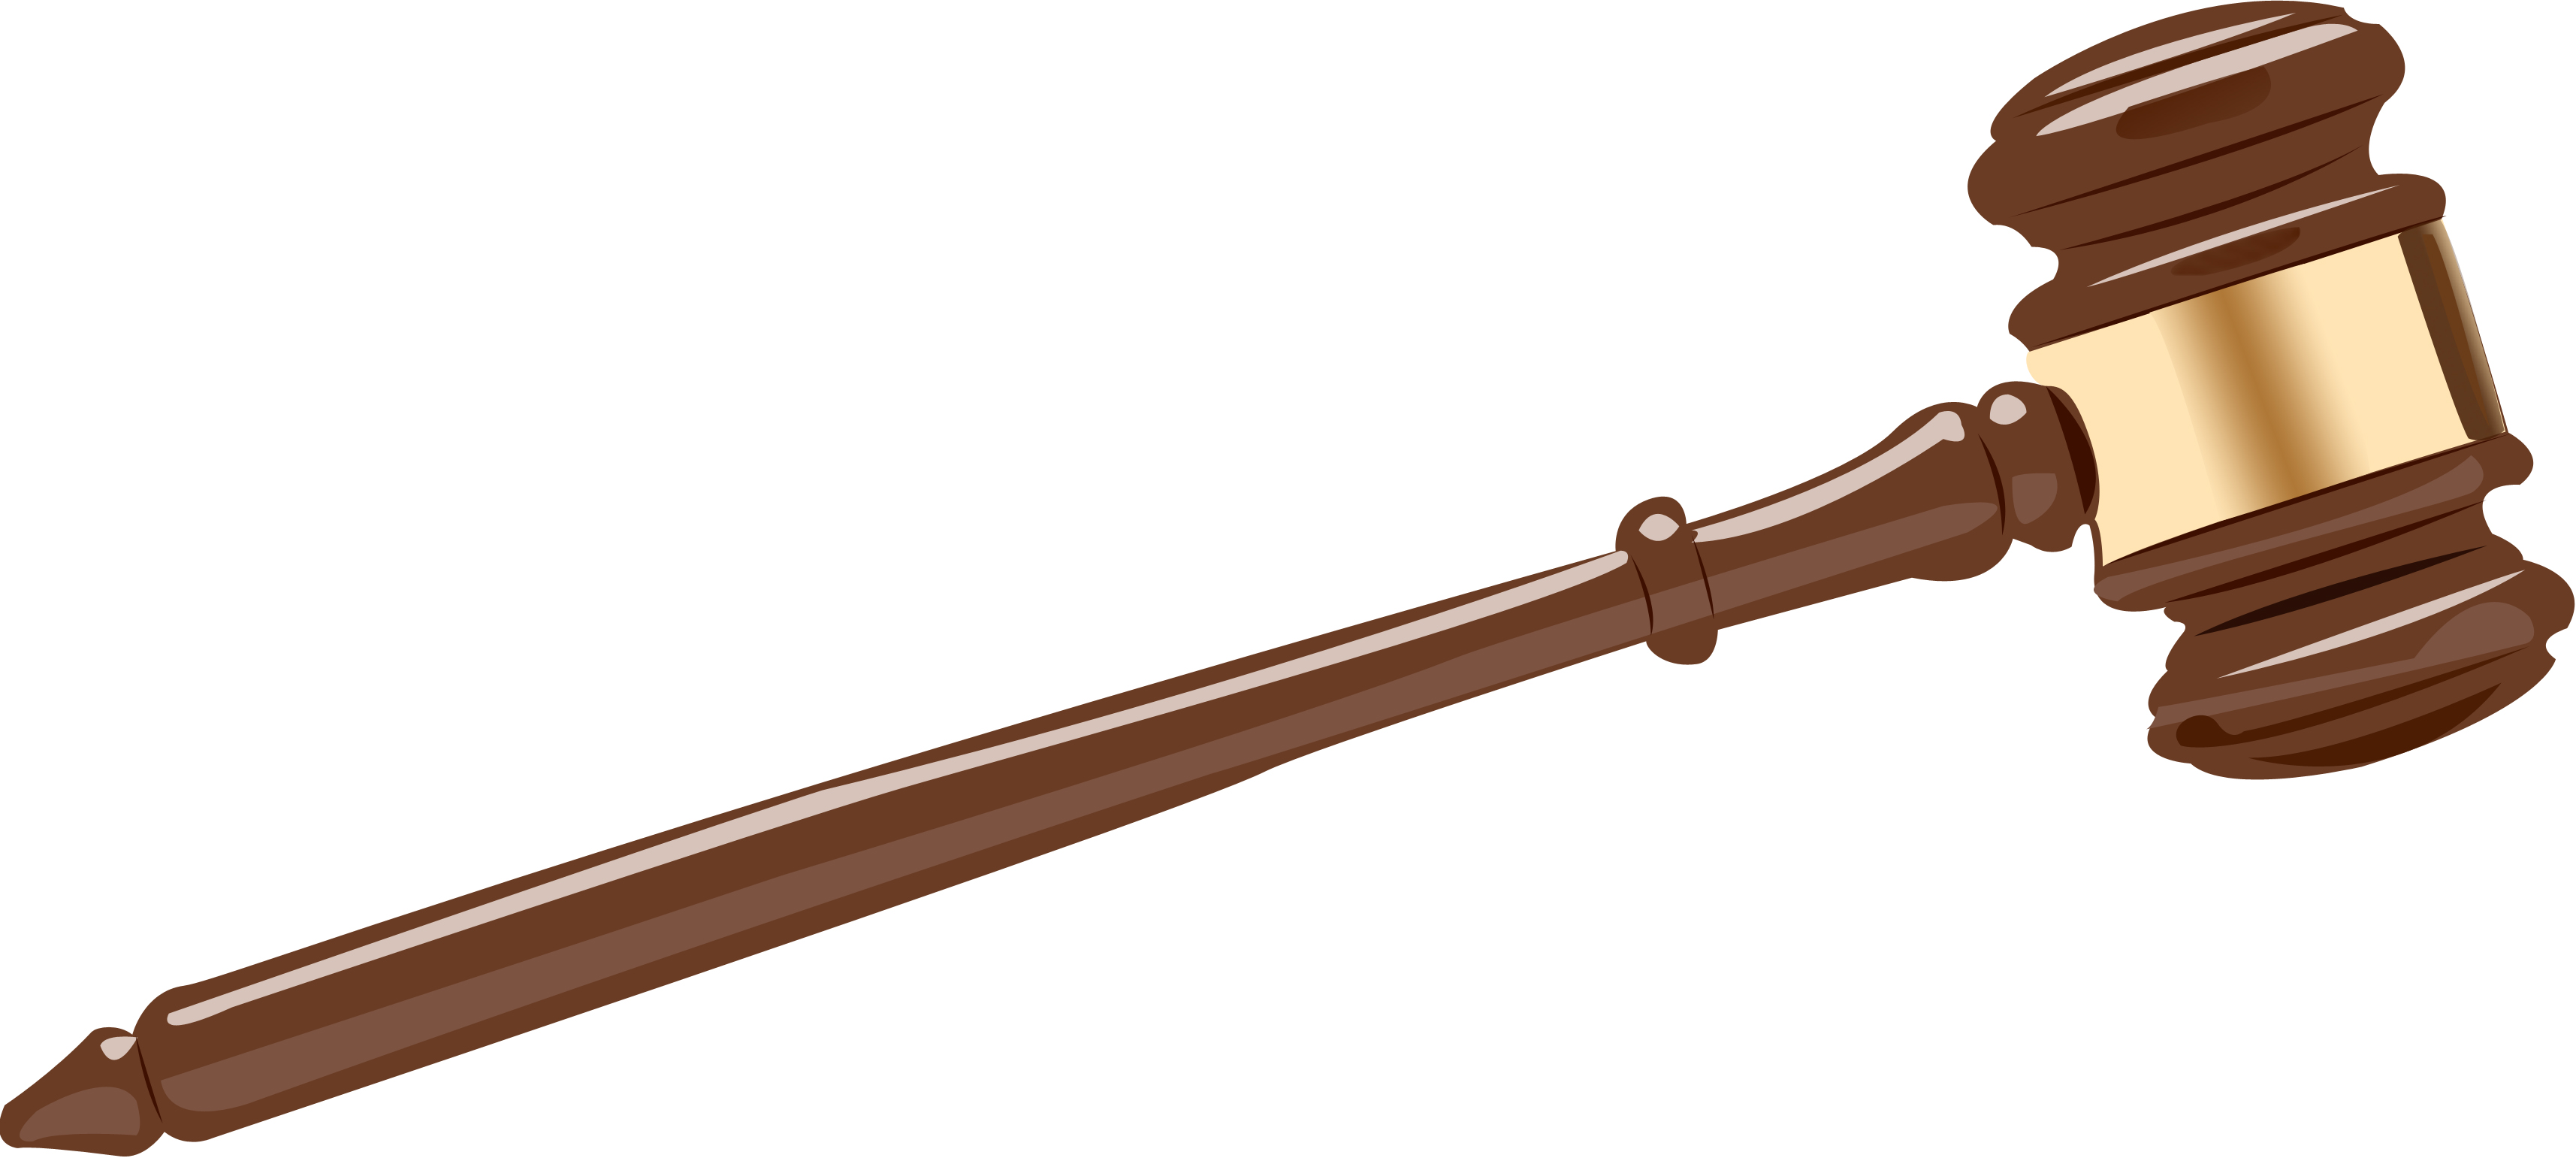 Gavel clip art clipart for you clipartcow